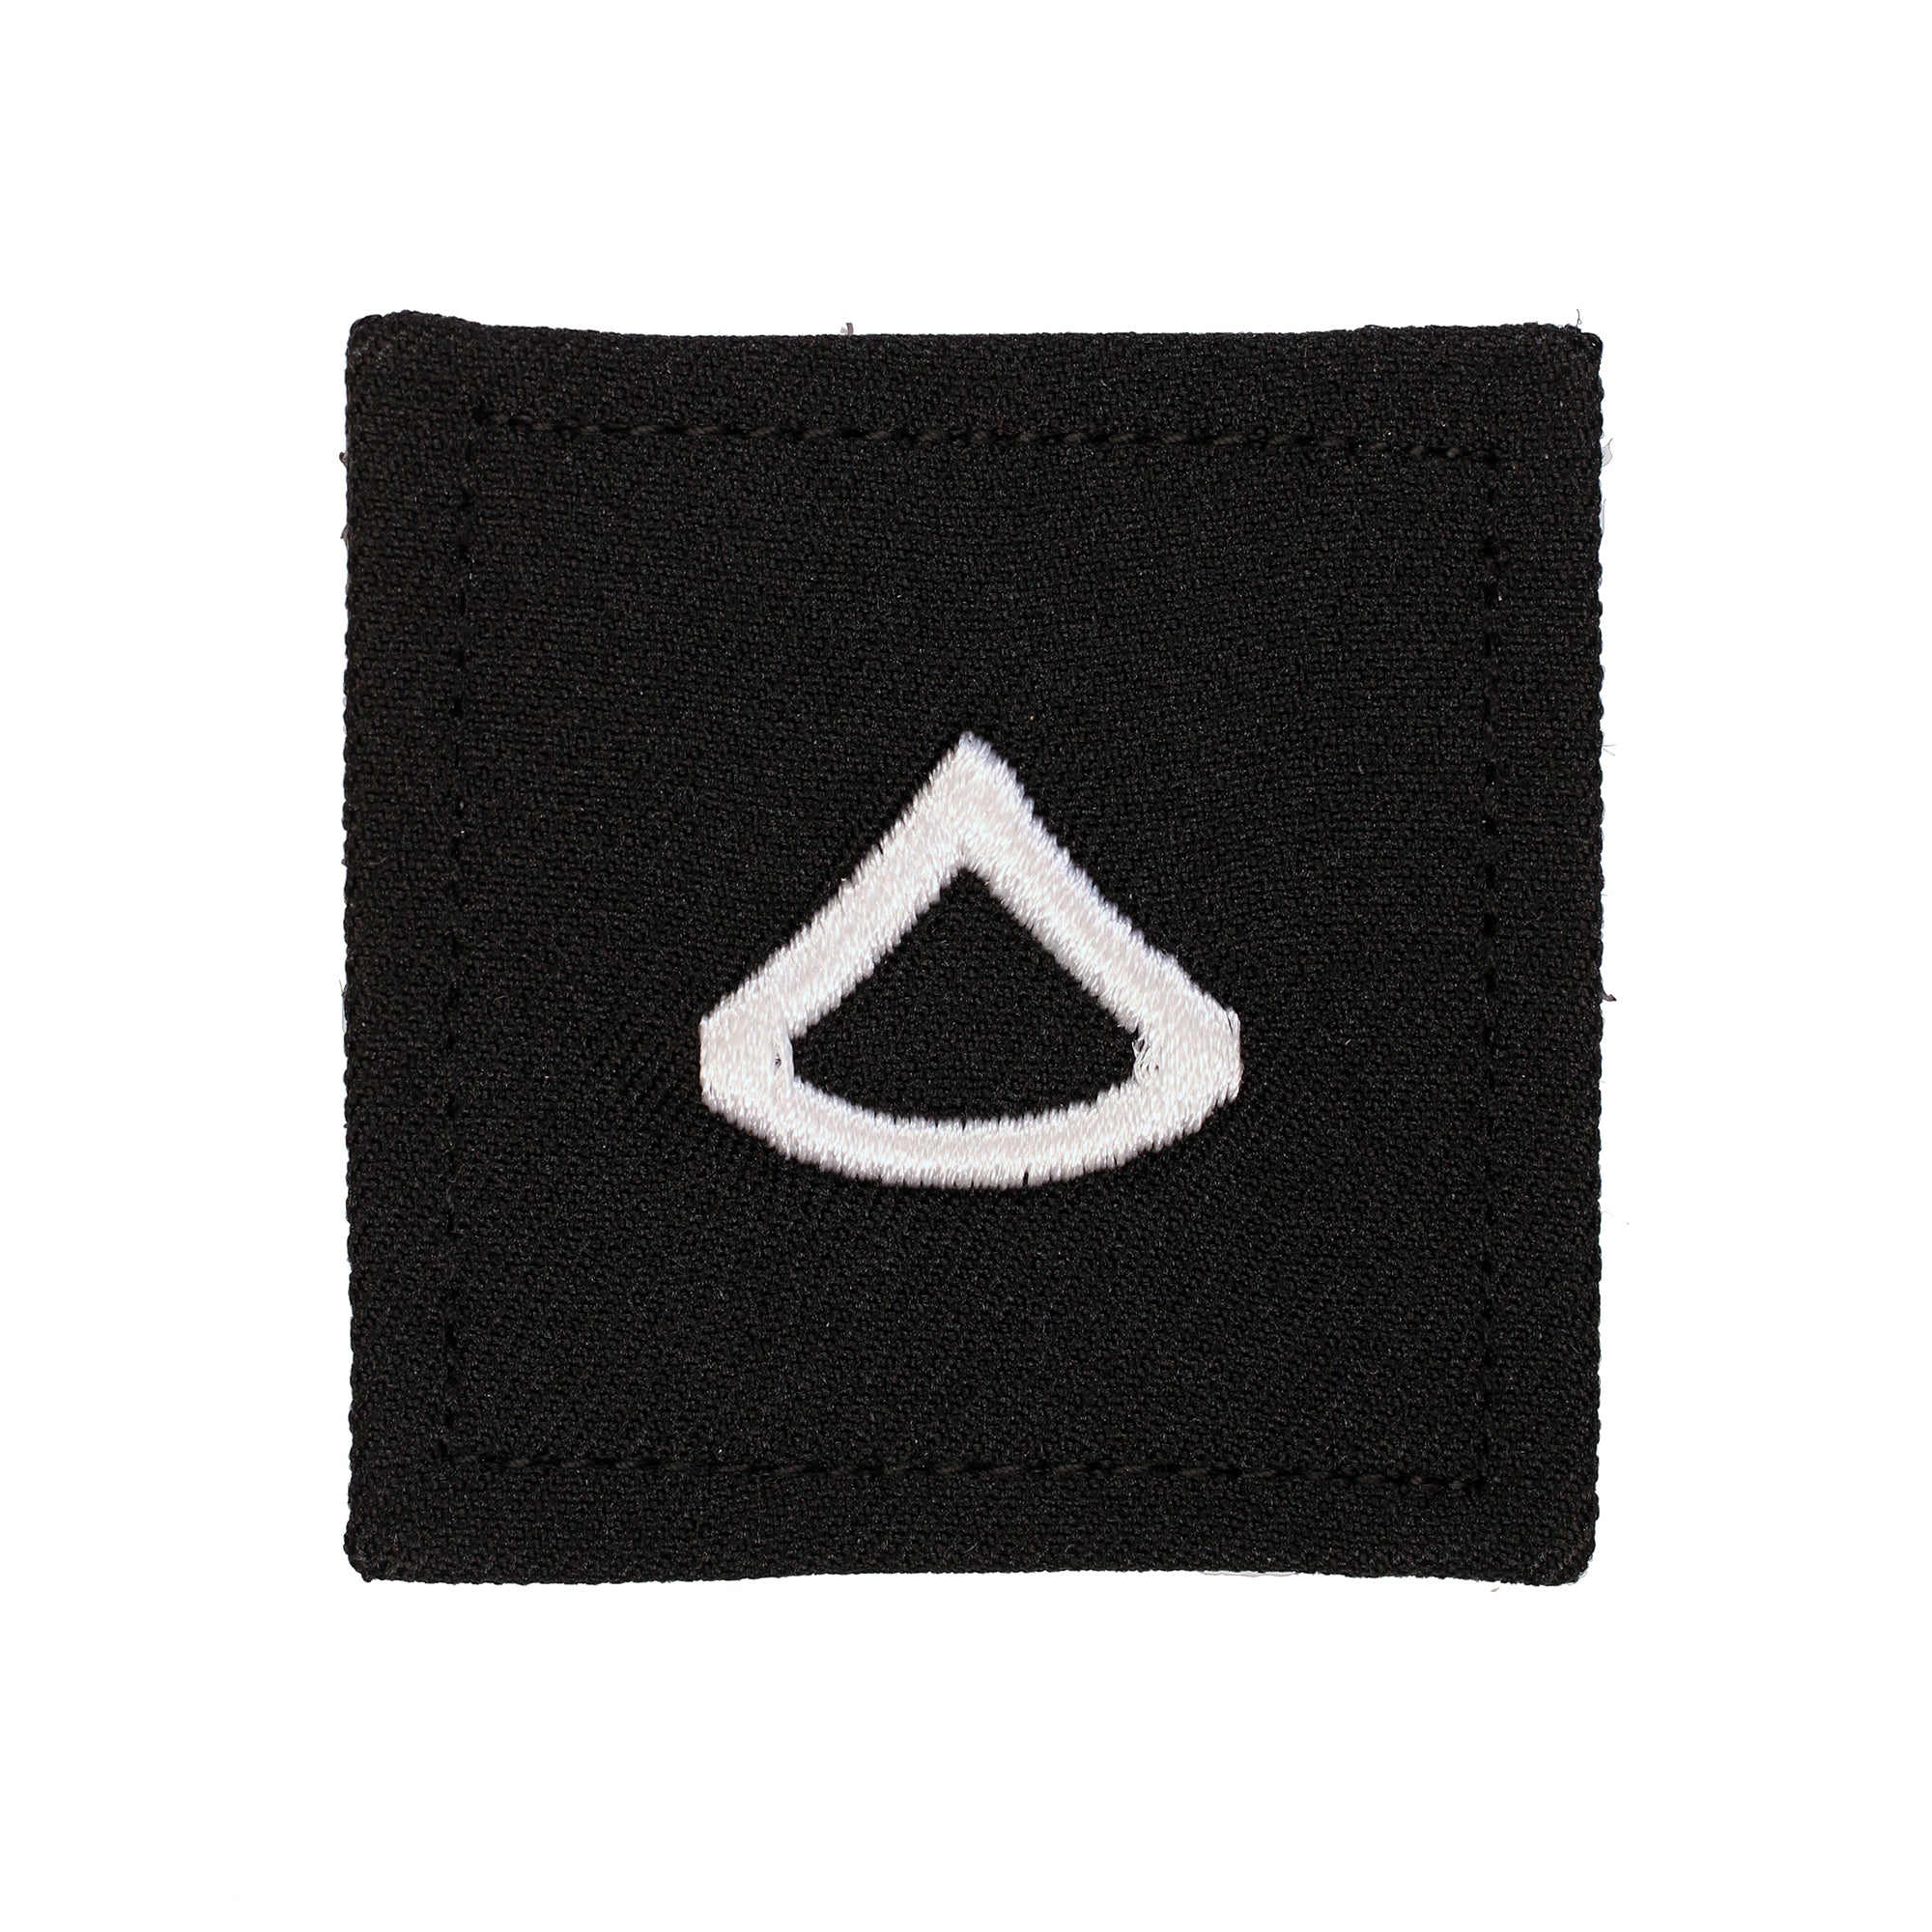 PRIVATE FIRST CLASS 2X2 BLACK WITH HOOK FASTNER - Insignia Depot